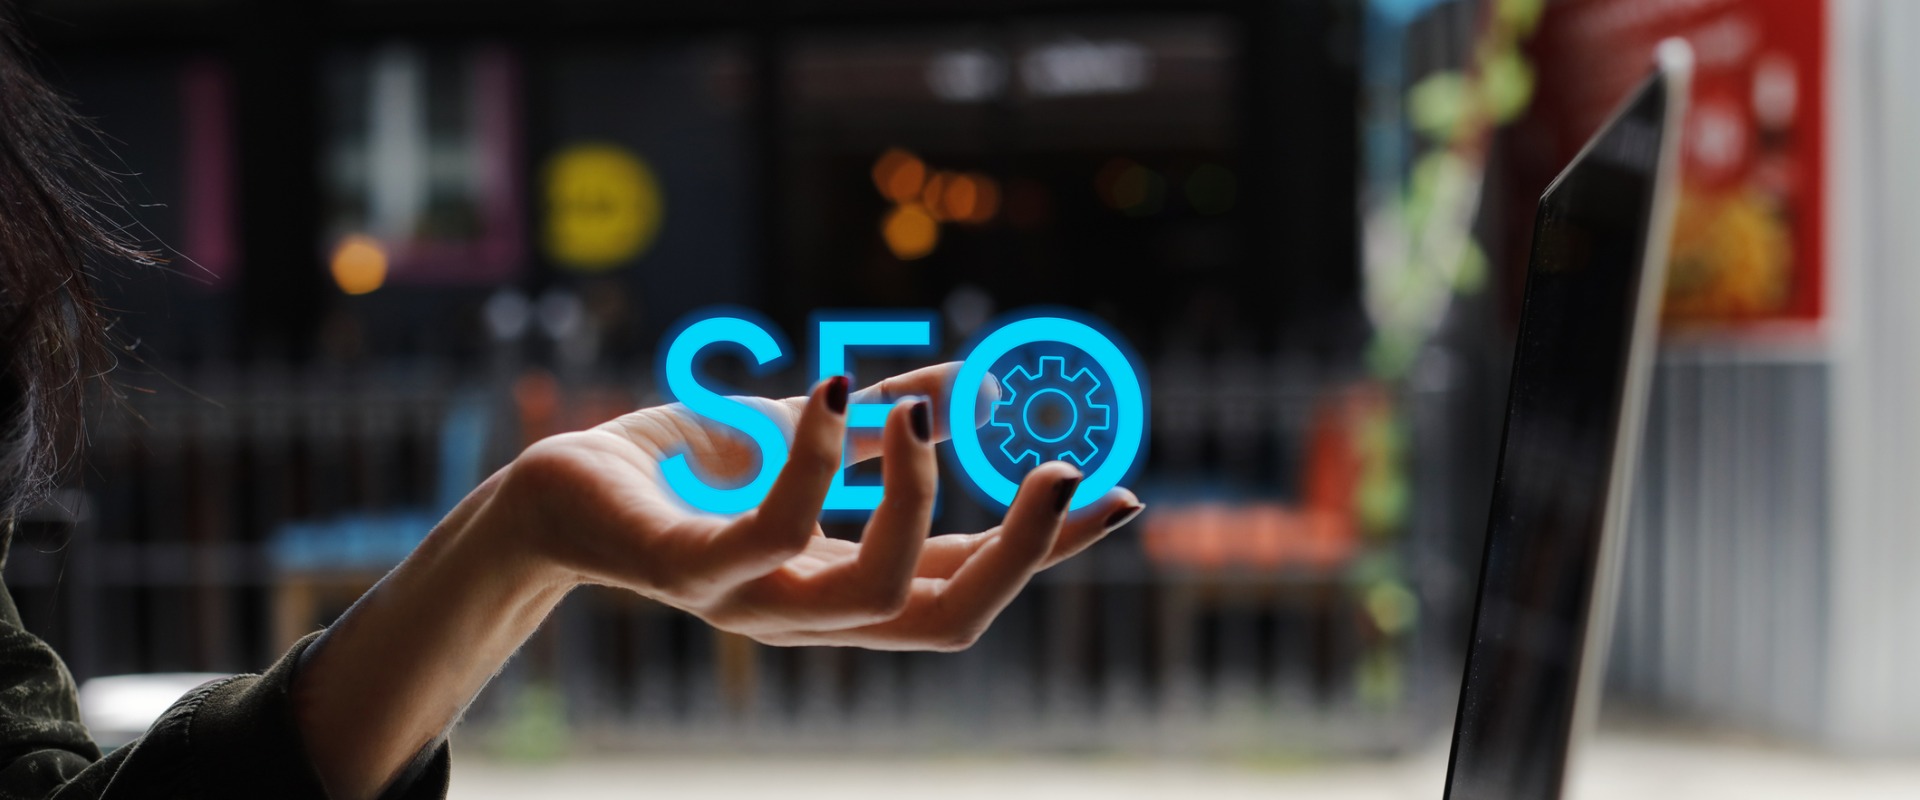 What are the core elements of seo?